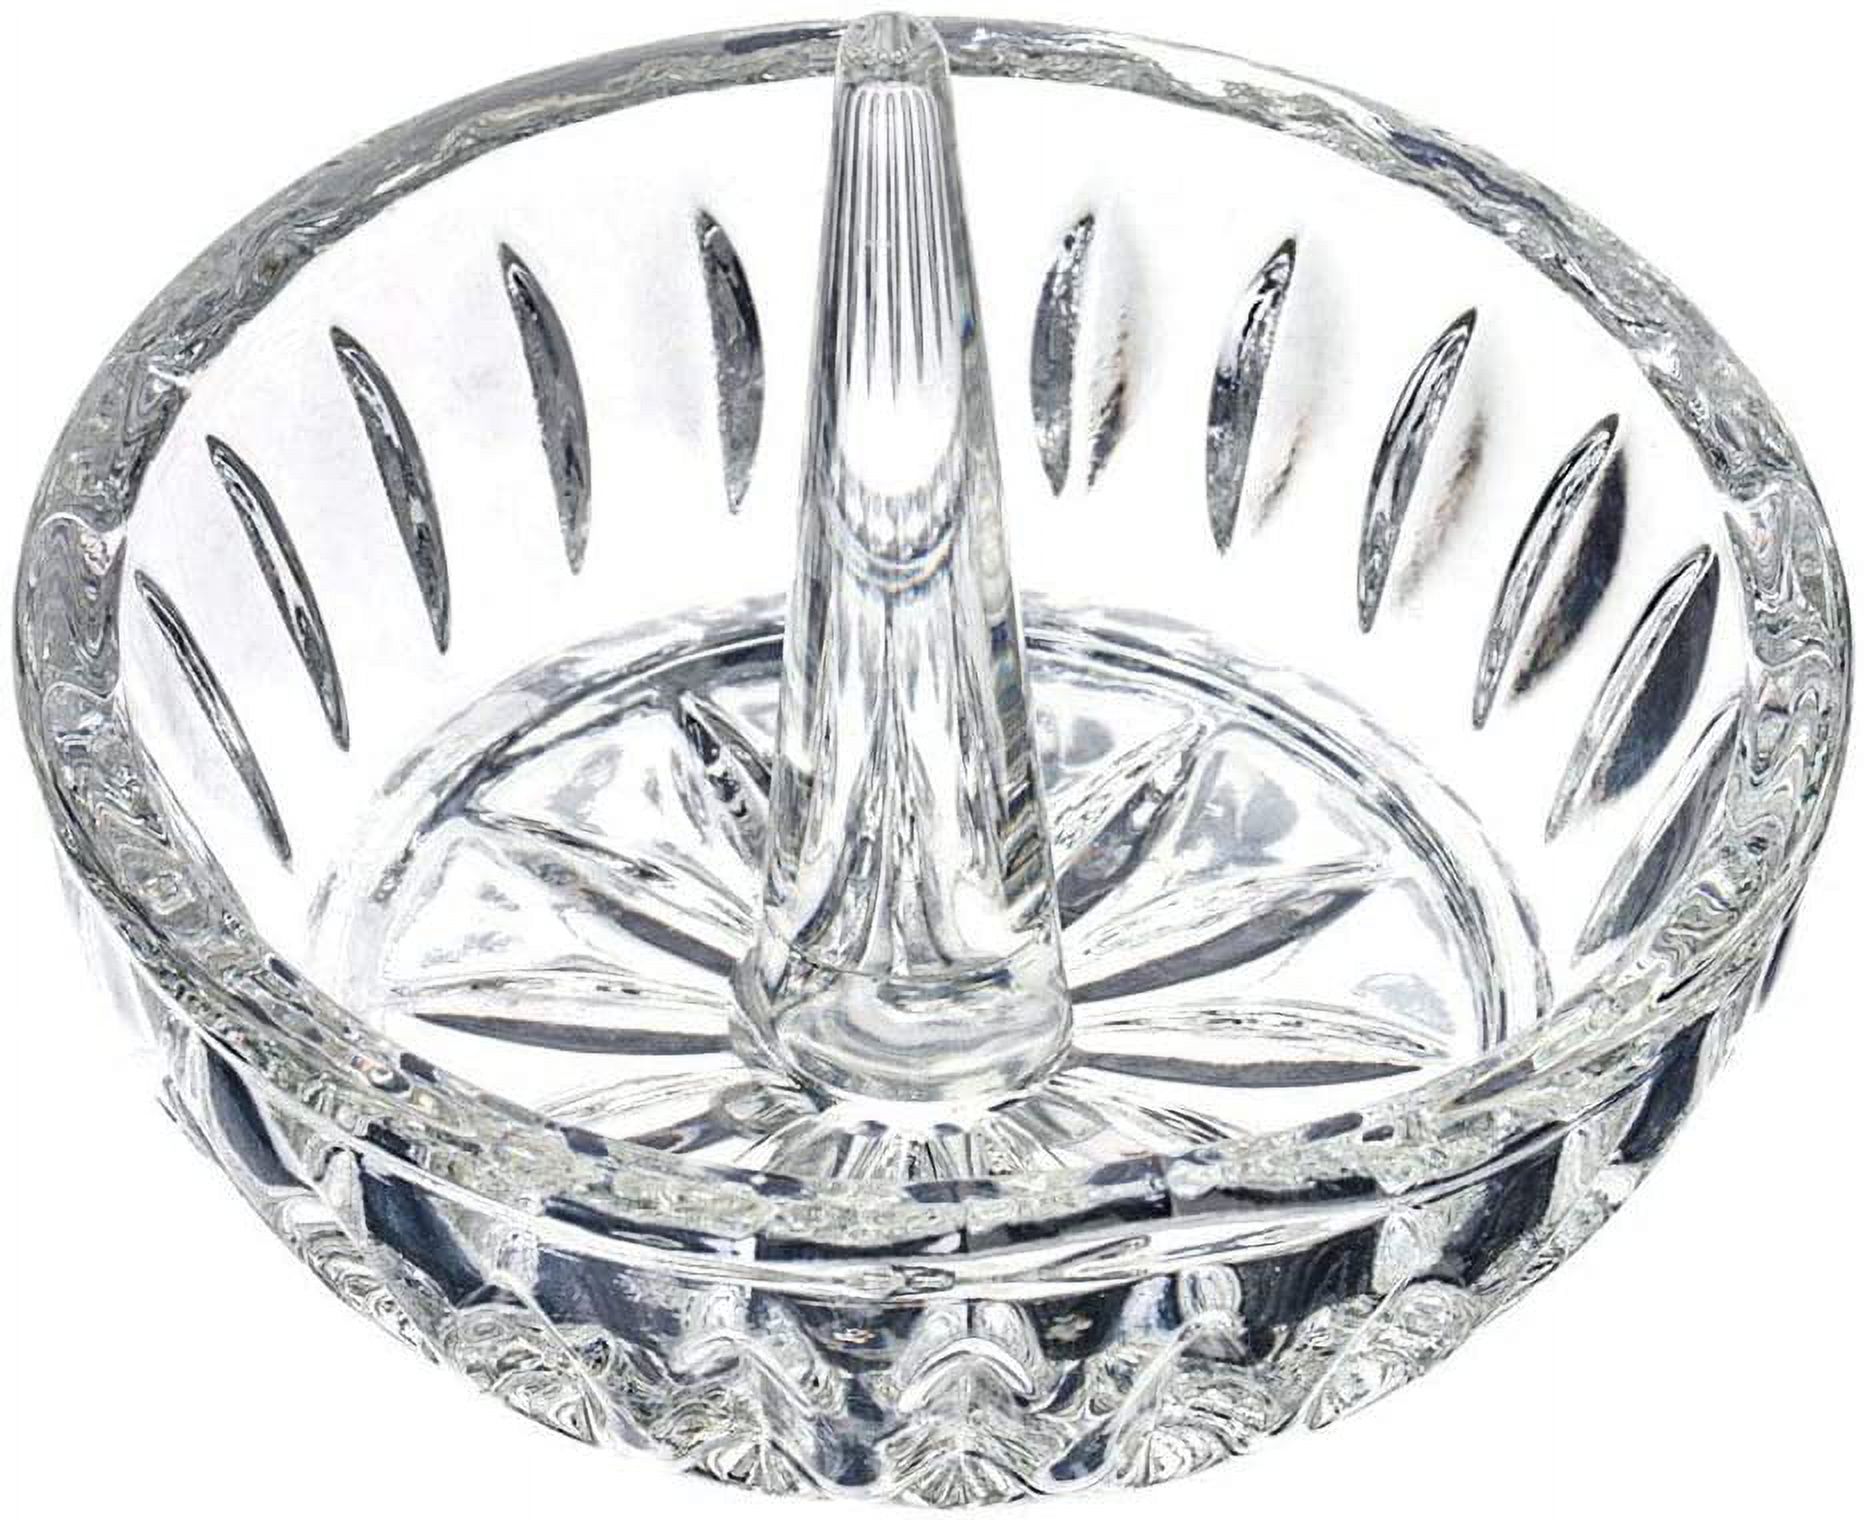 H&D Crystal Crysta Round Ring Holder Display Dish Wedding Decoration Gifts - image 1 of 3